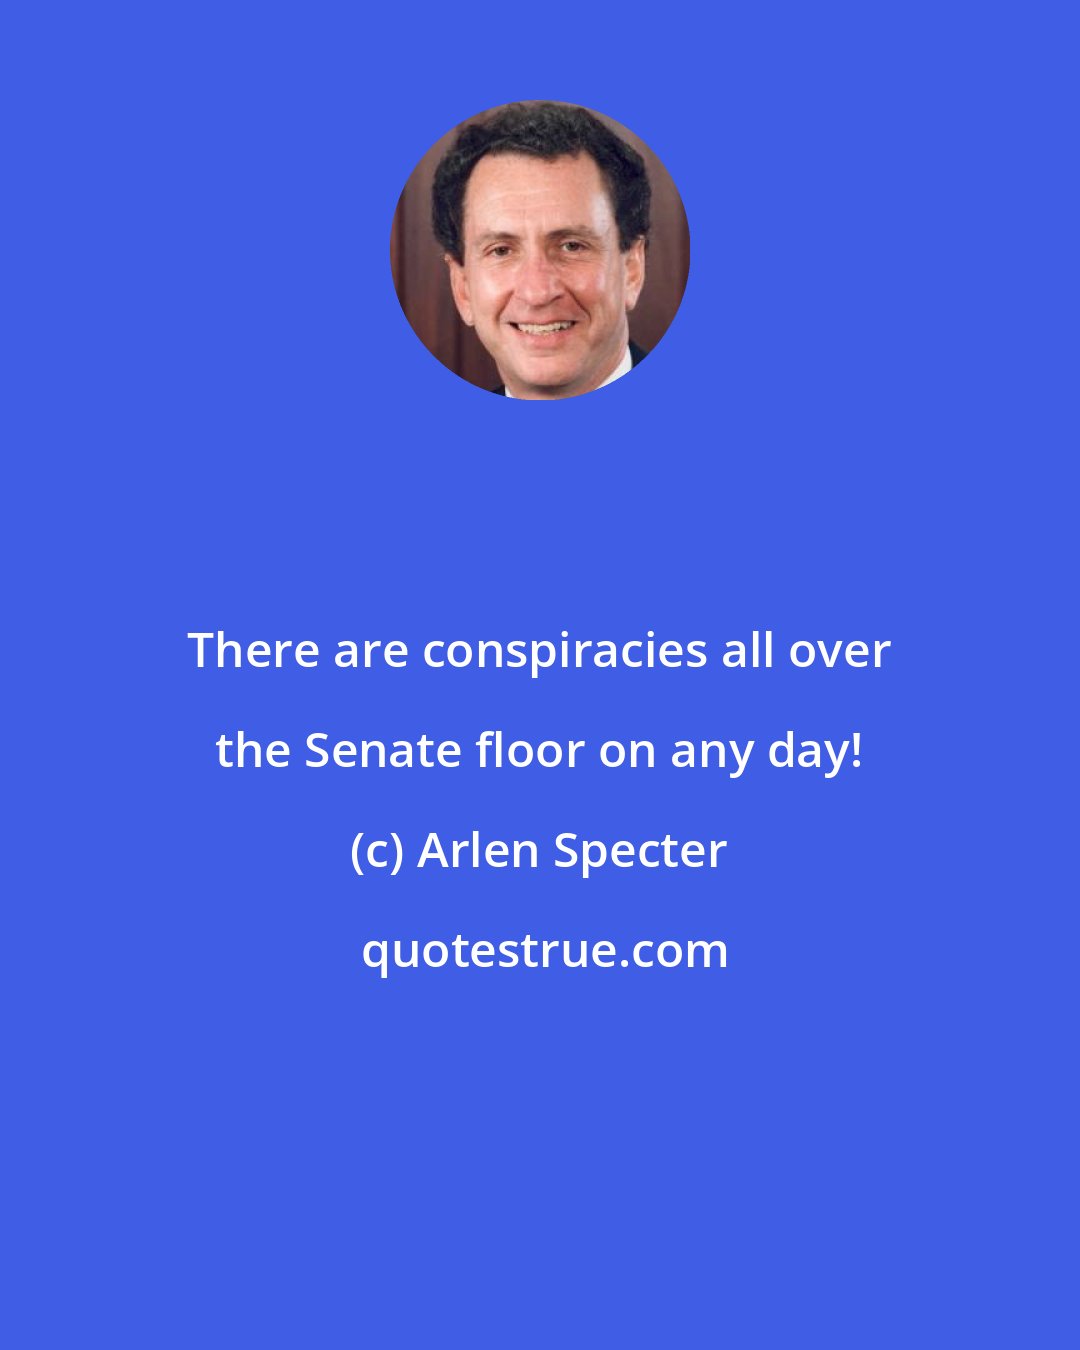 Arlen Specter: There are conspiracies all over the Senate floor on any day!